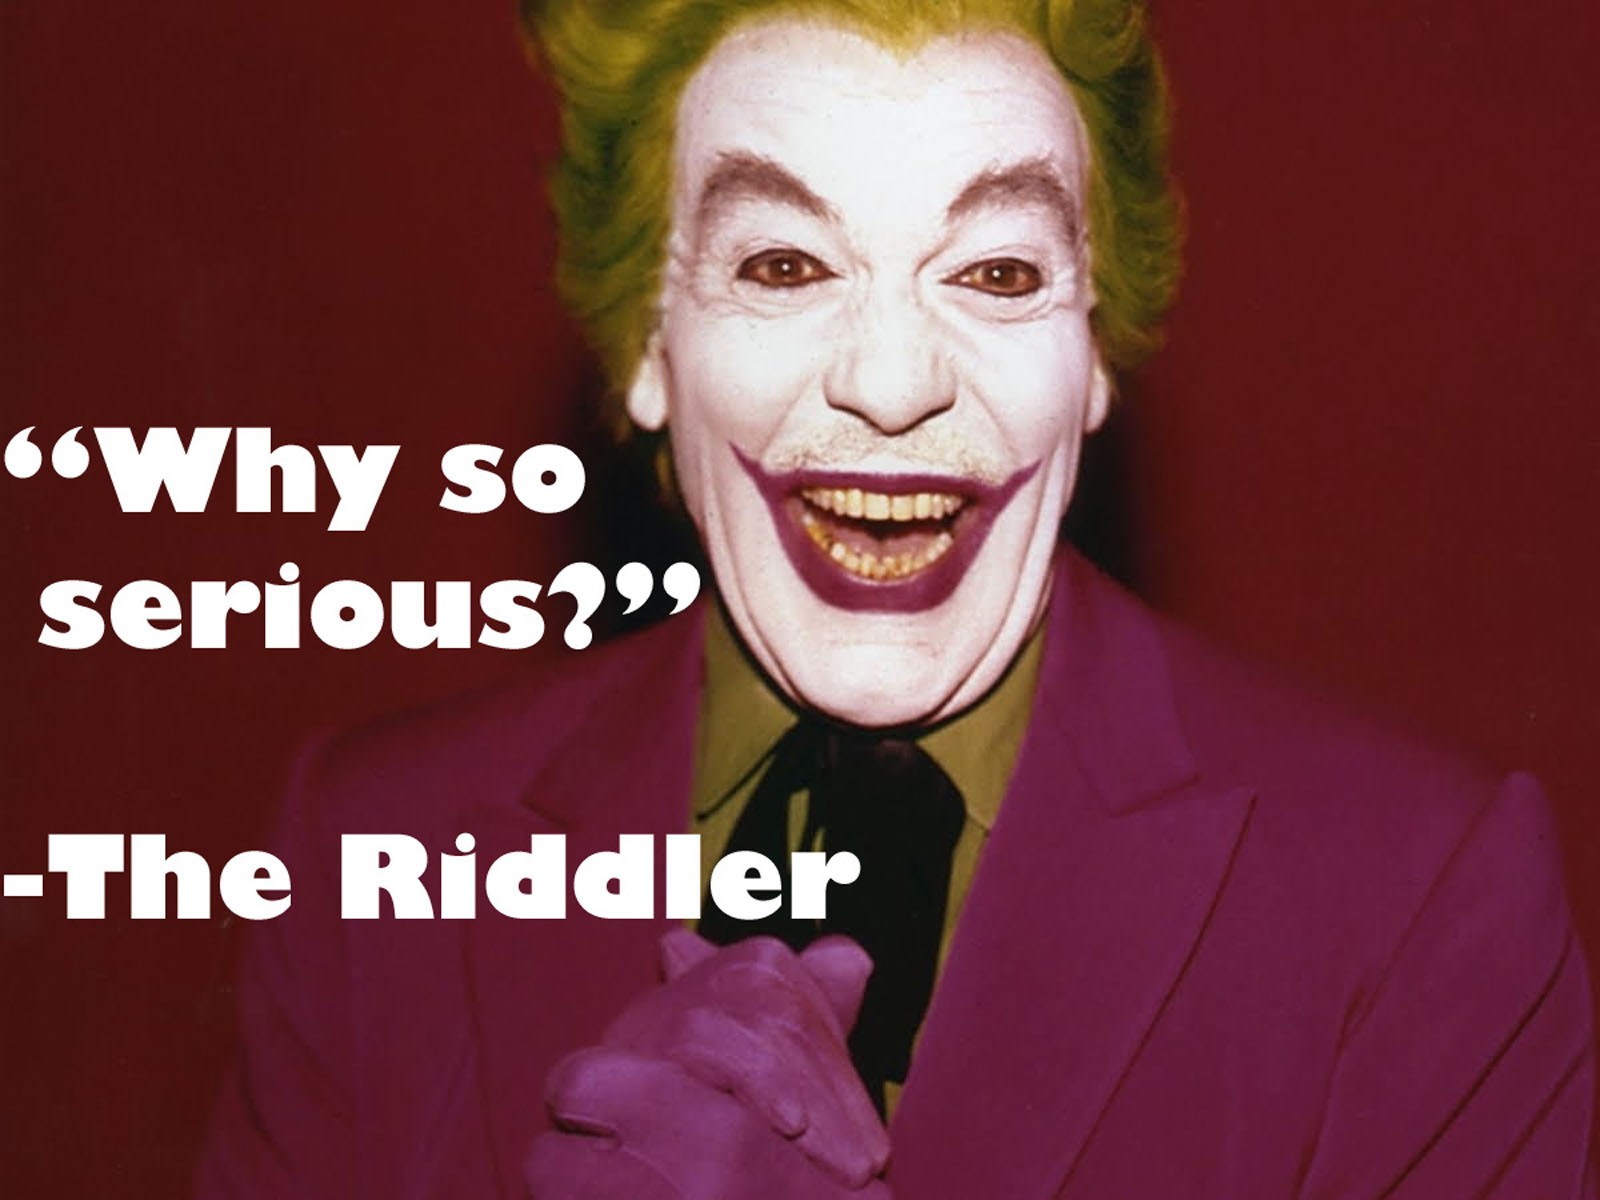 wallpaper: Why so serious wallpapers